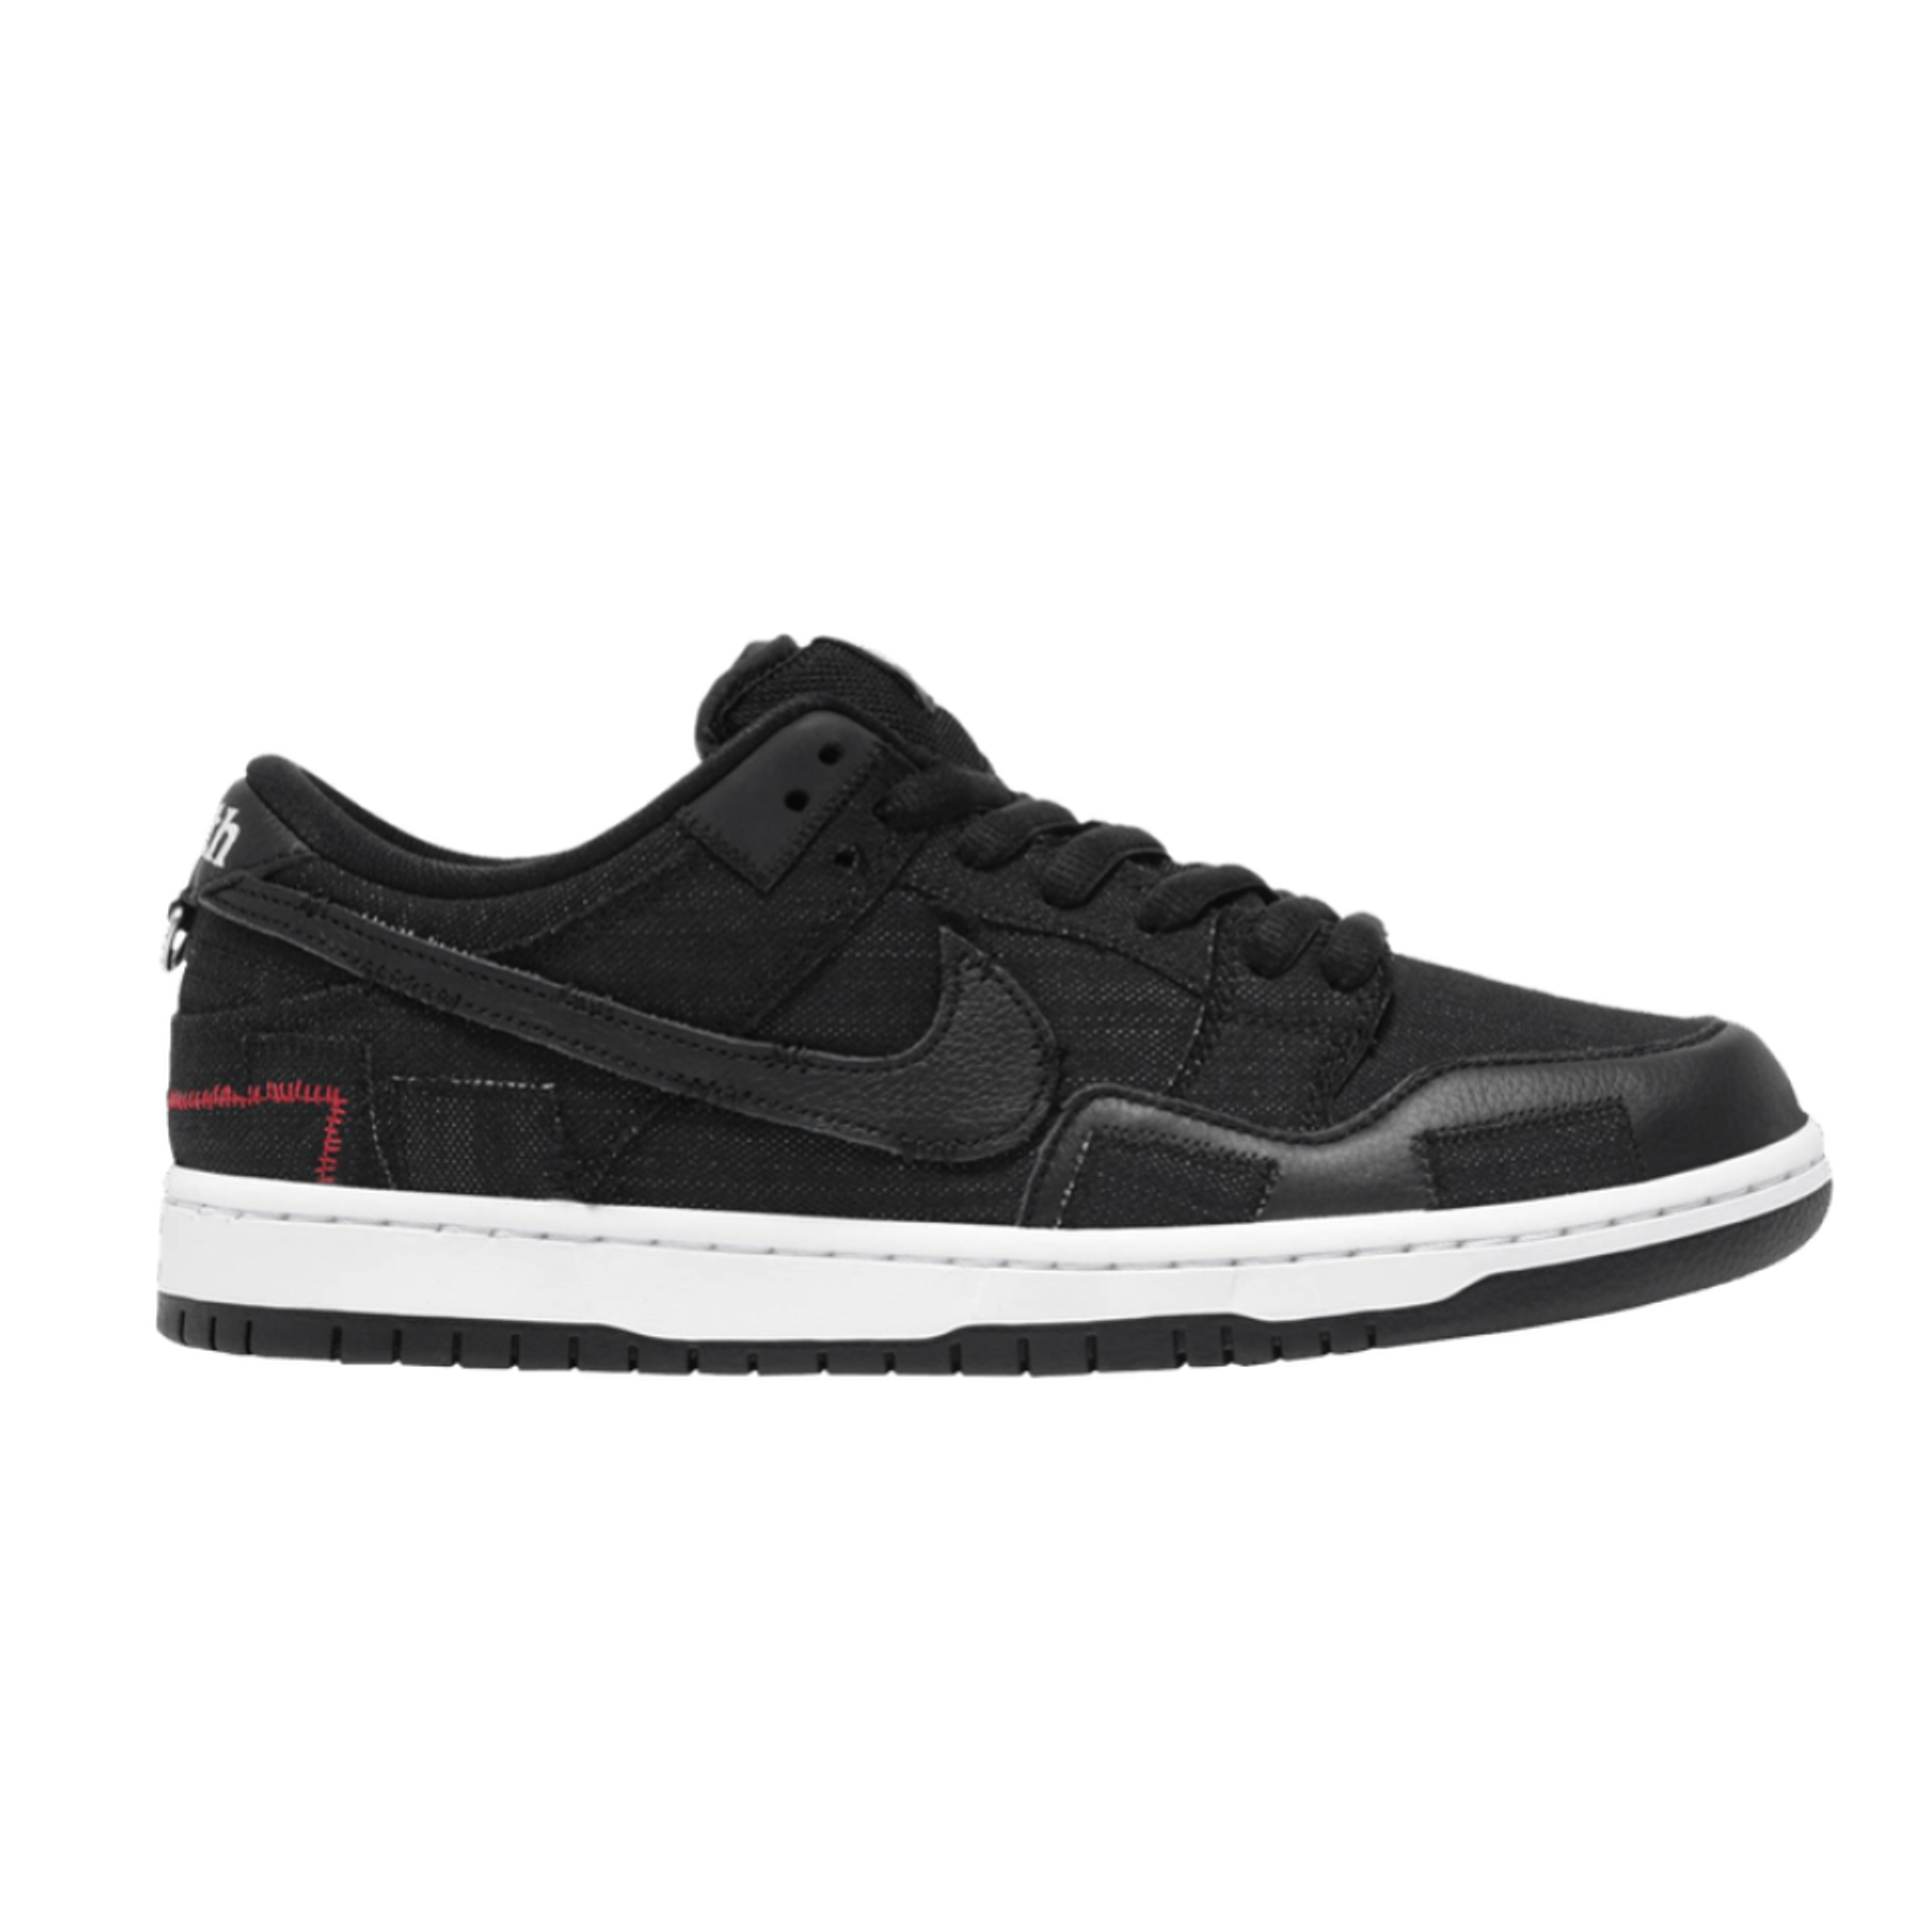 Nike Wasted Youth x Dunk Low SB 'Black Denim' Special Box